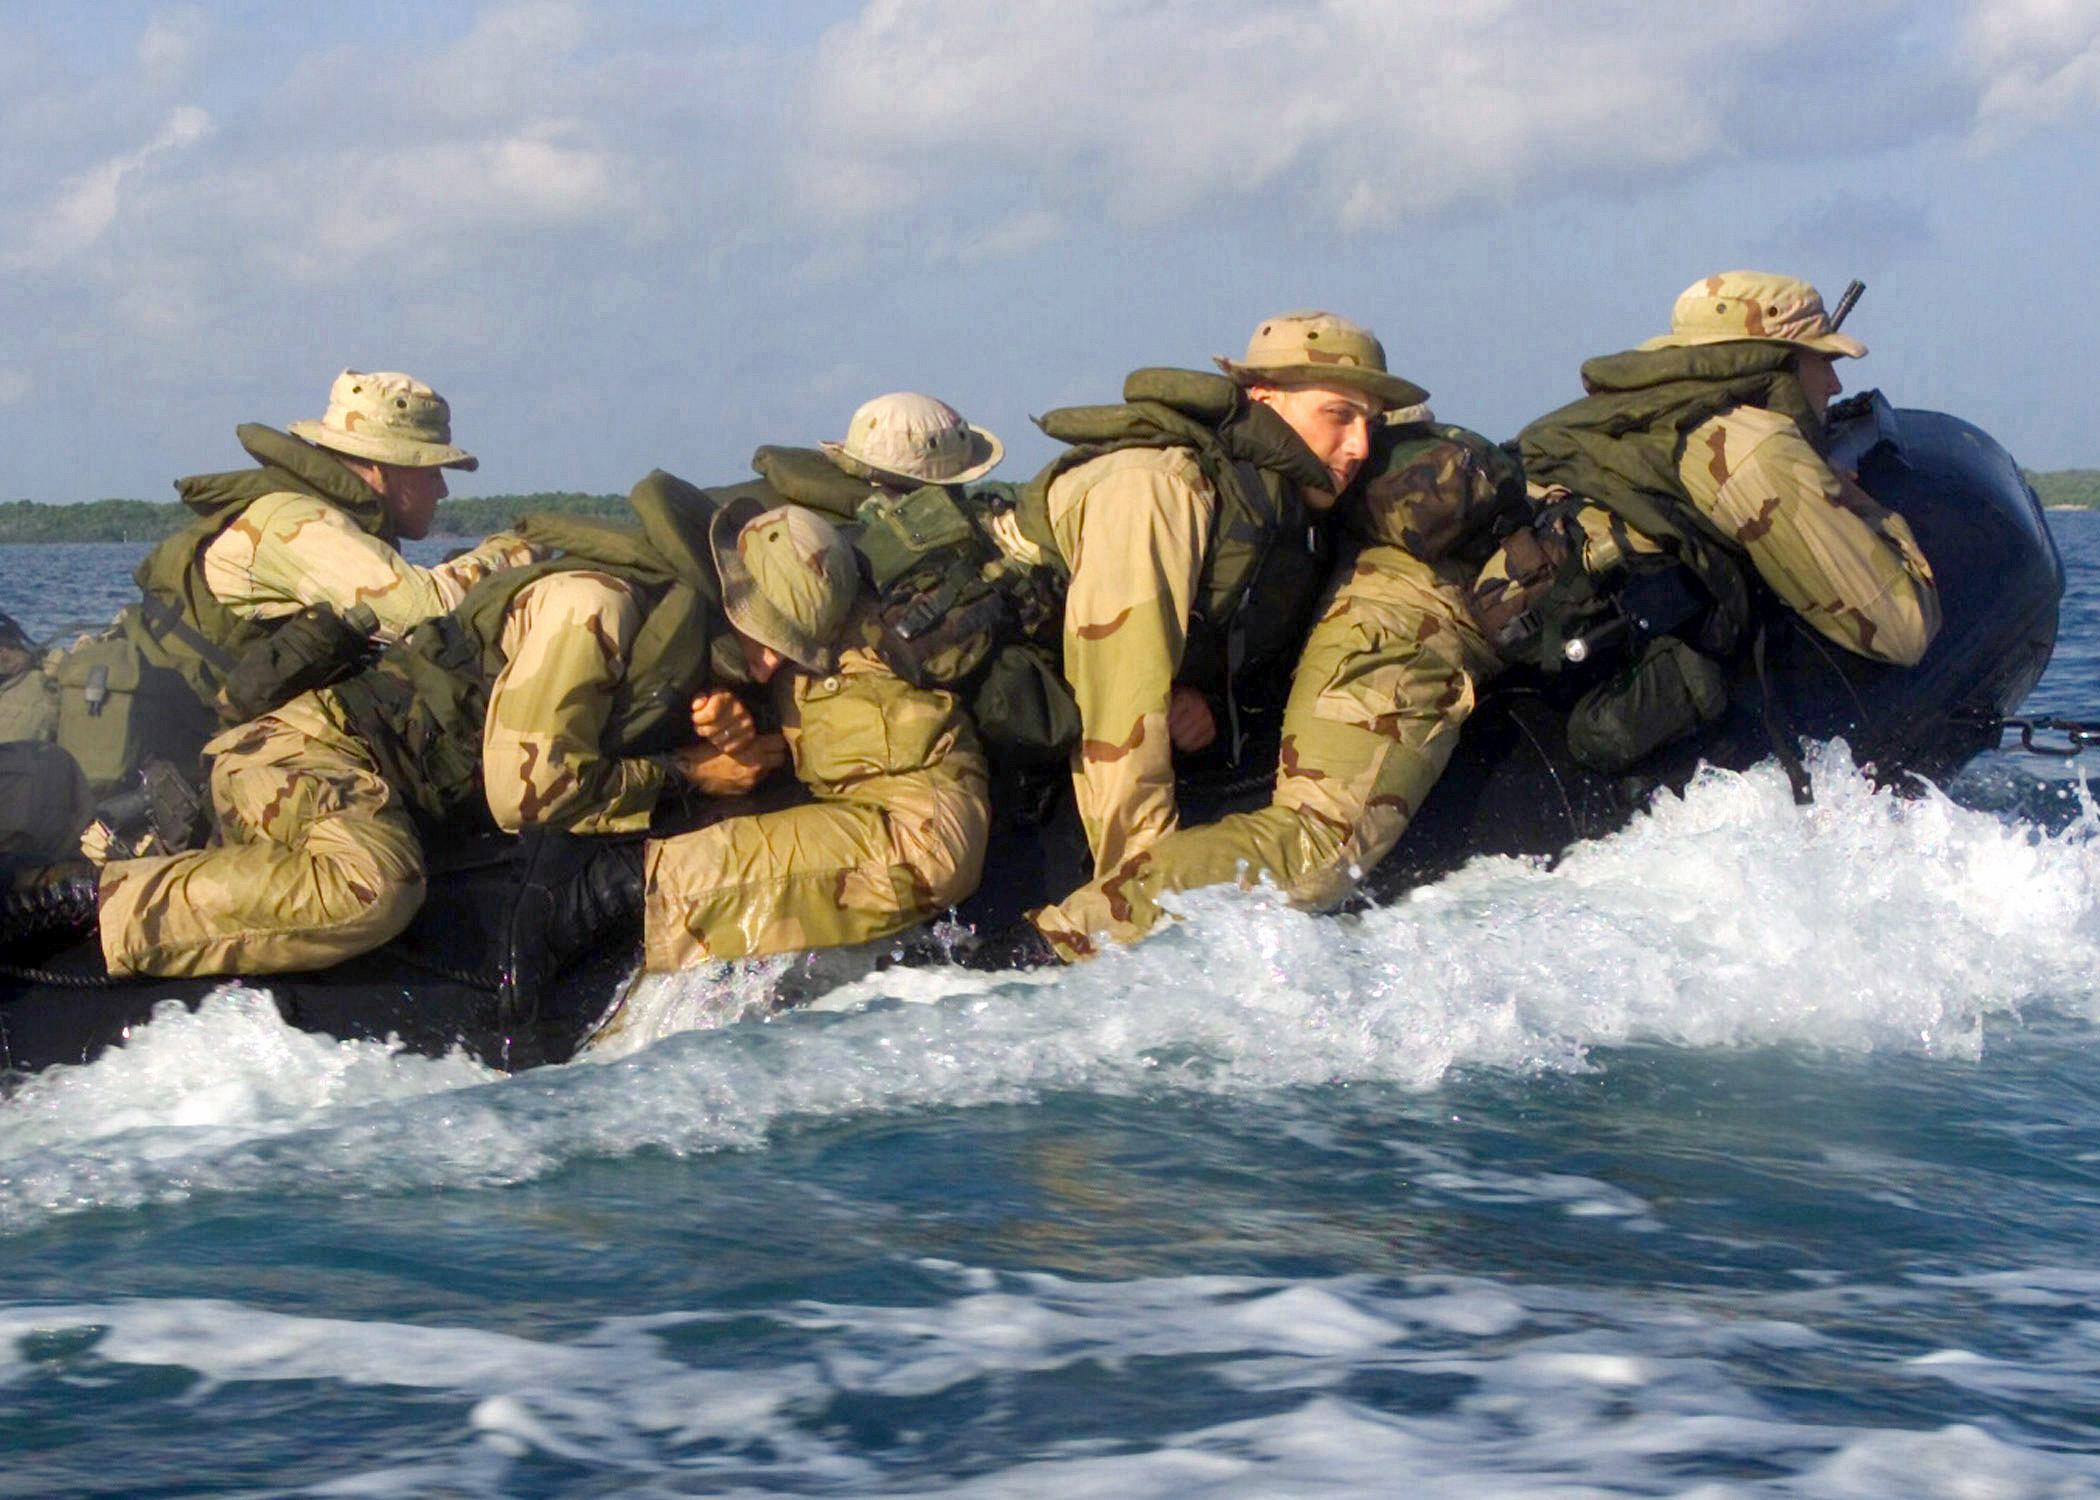 a group of soldiers is on an inflatable raft in the water